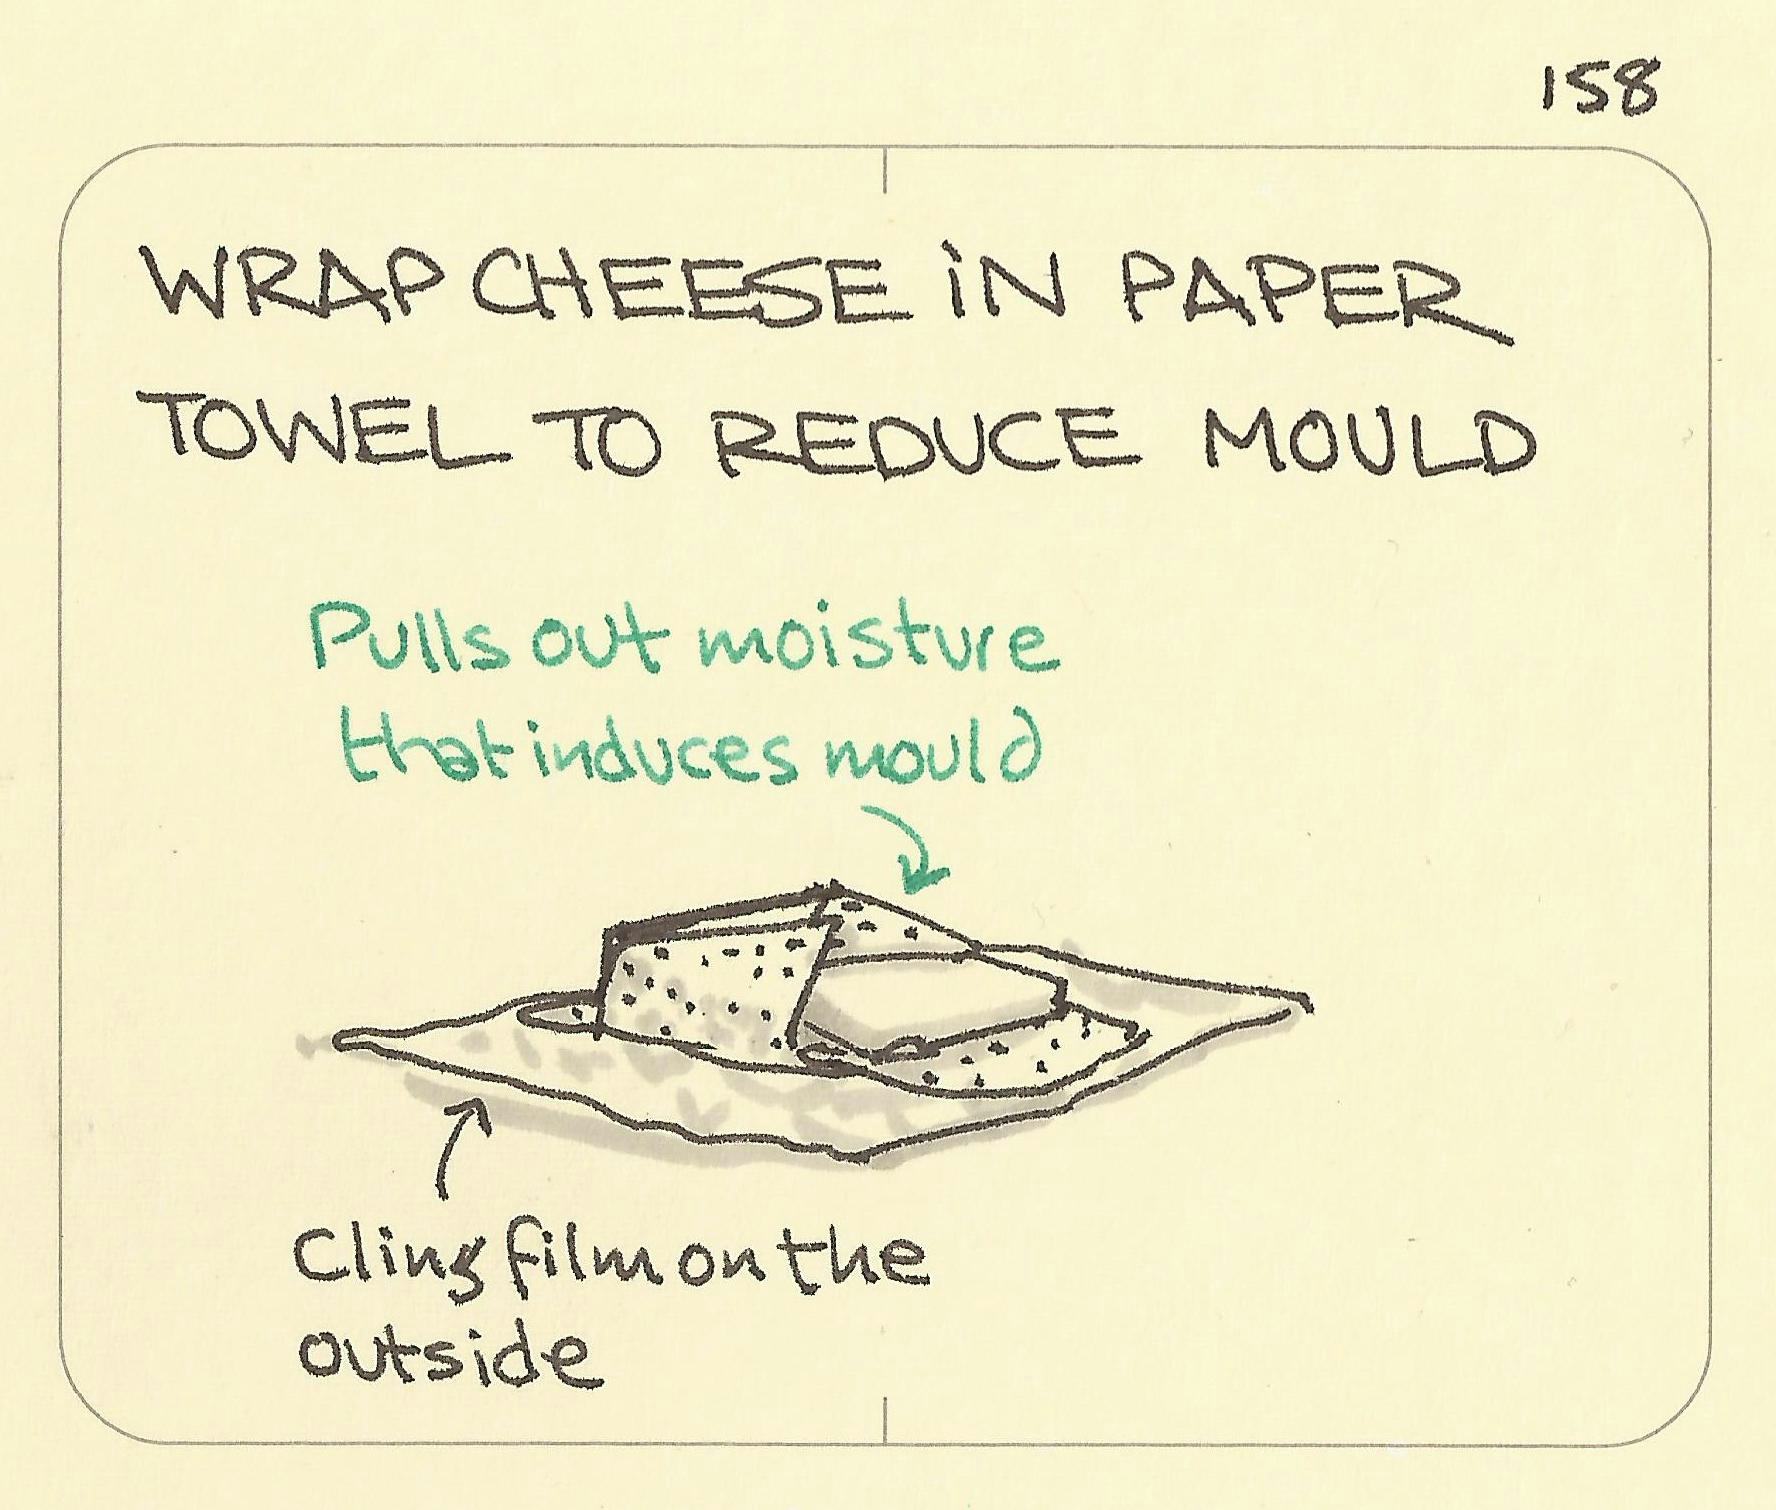 Wrap cheese in paper towel to reduce mould - Sketchplanations